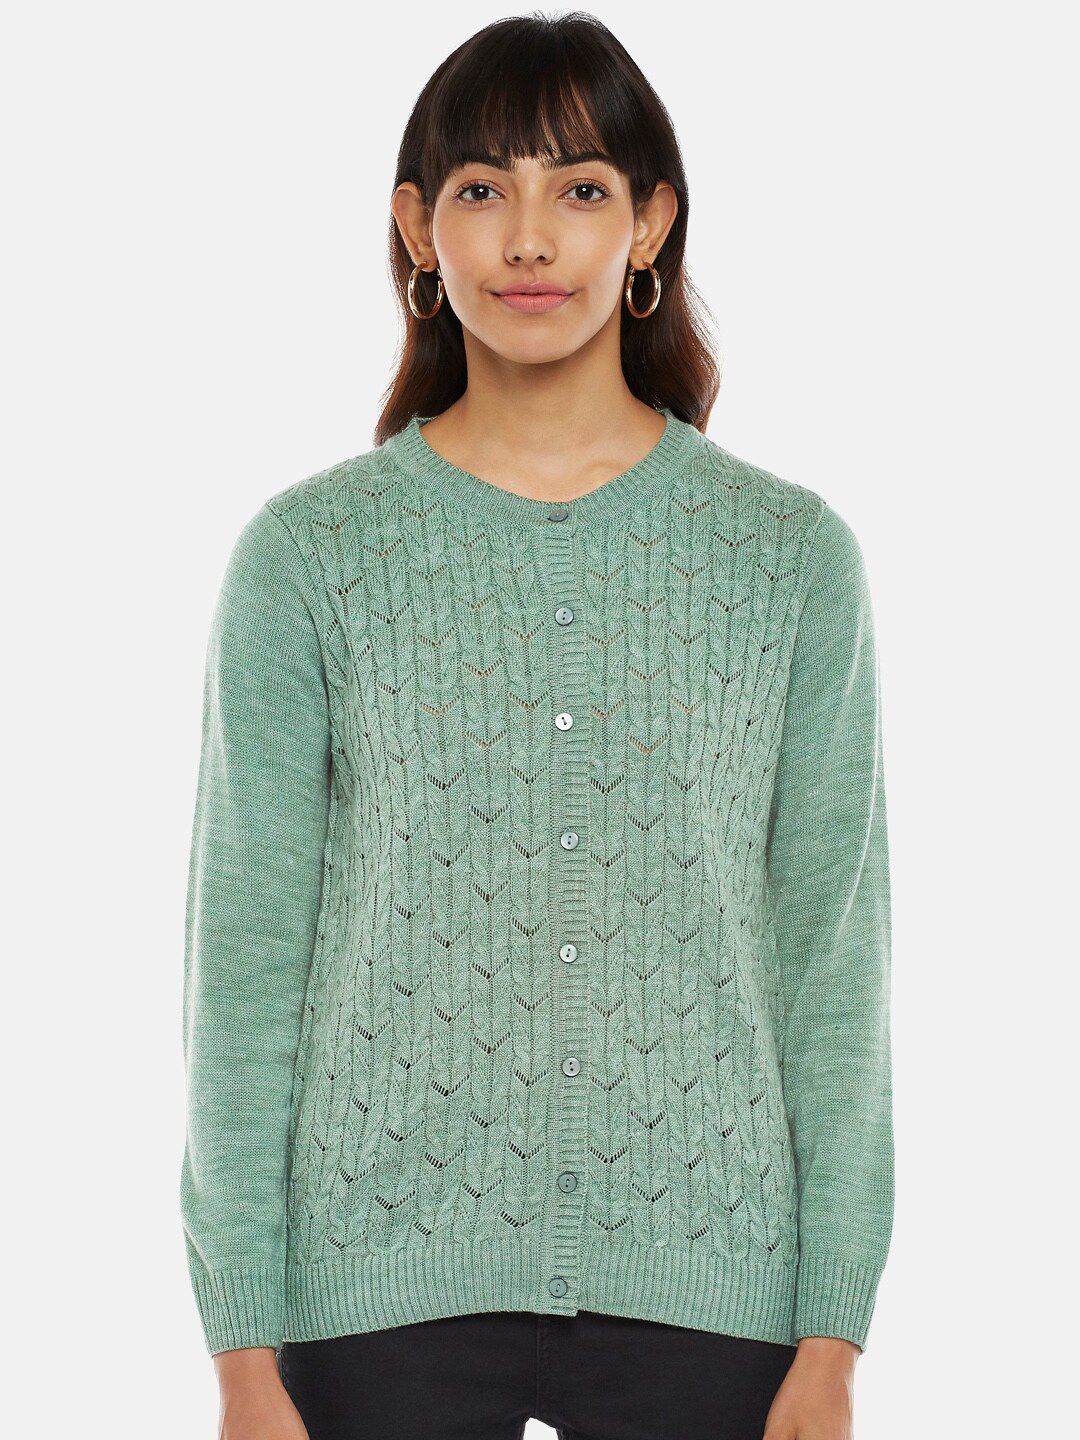 Honey by Pantaloons Women Green round neck  Cardigan sweater Price in India